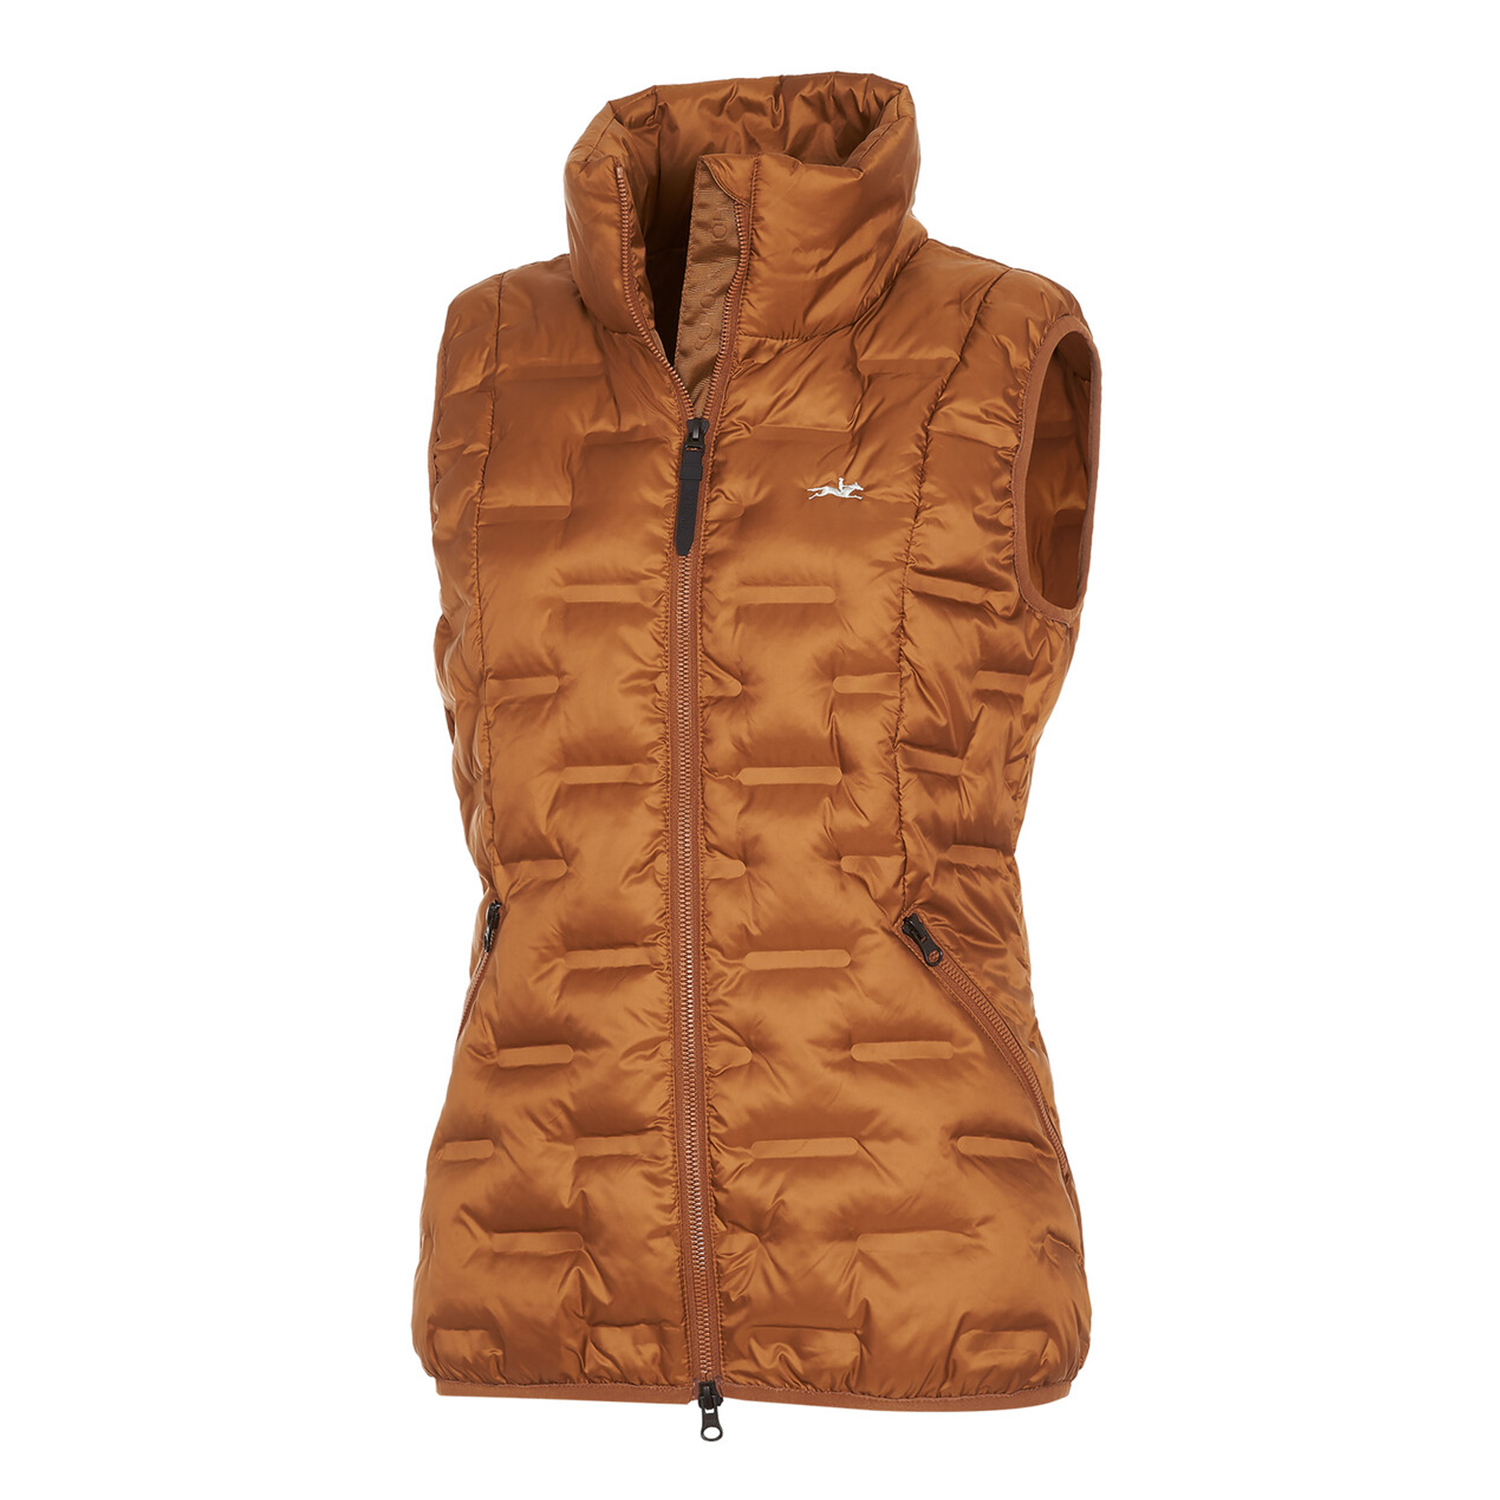 Hot Get Quilted Rose Cognac Sale Ladies Favorite Online Your Schockemohle Style Waistcoat,